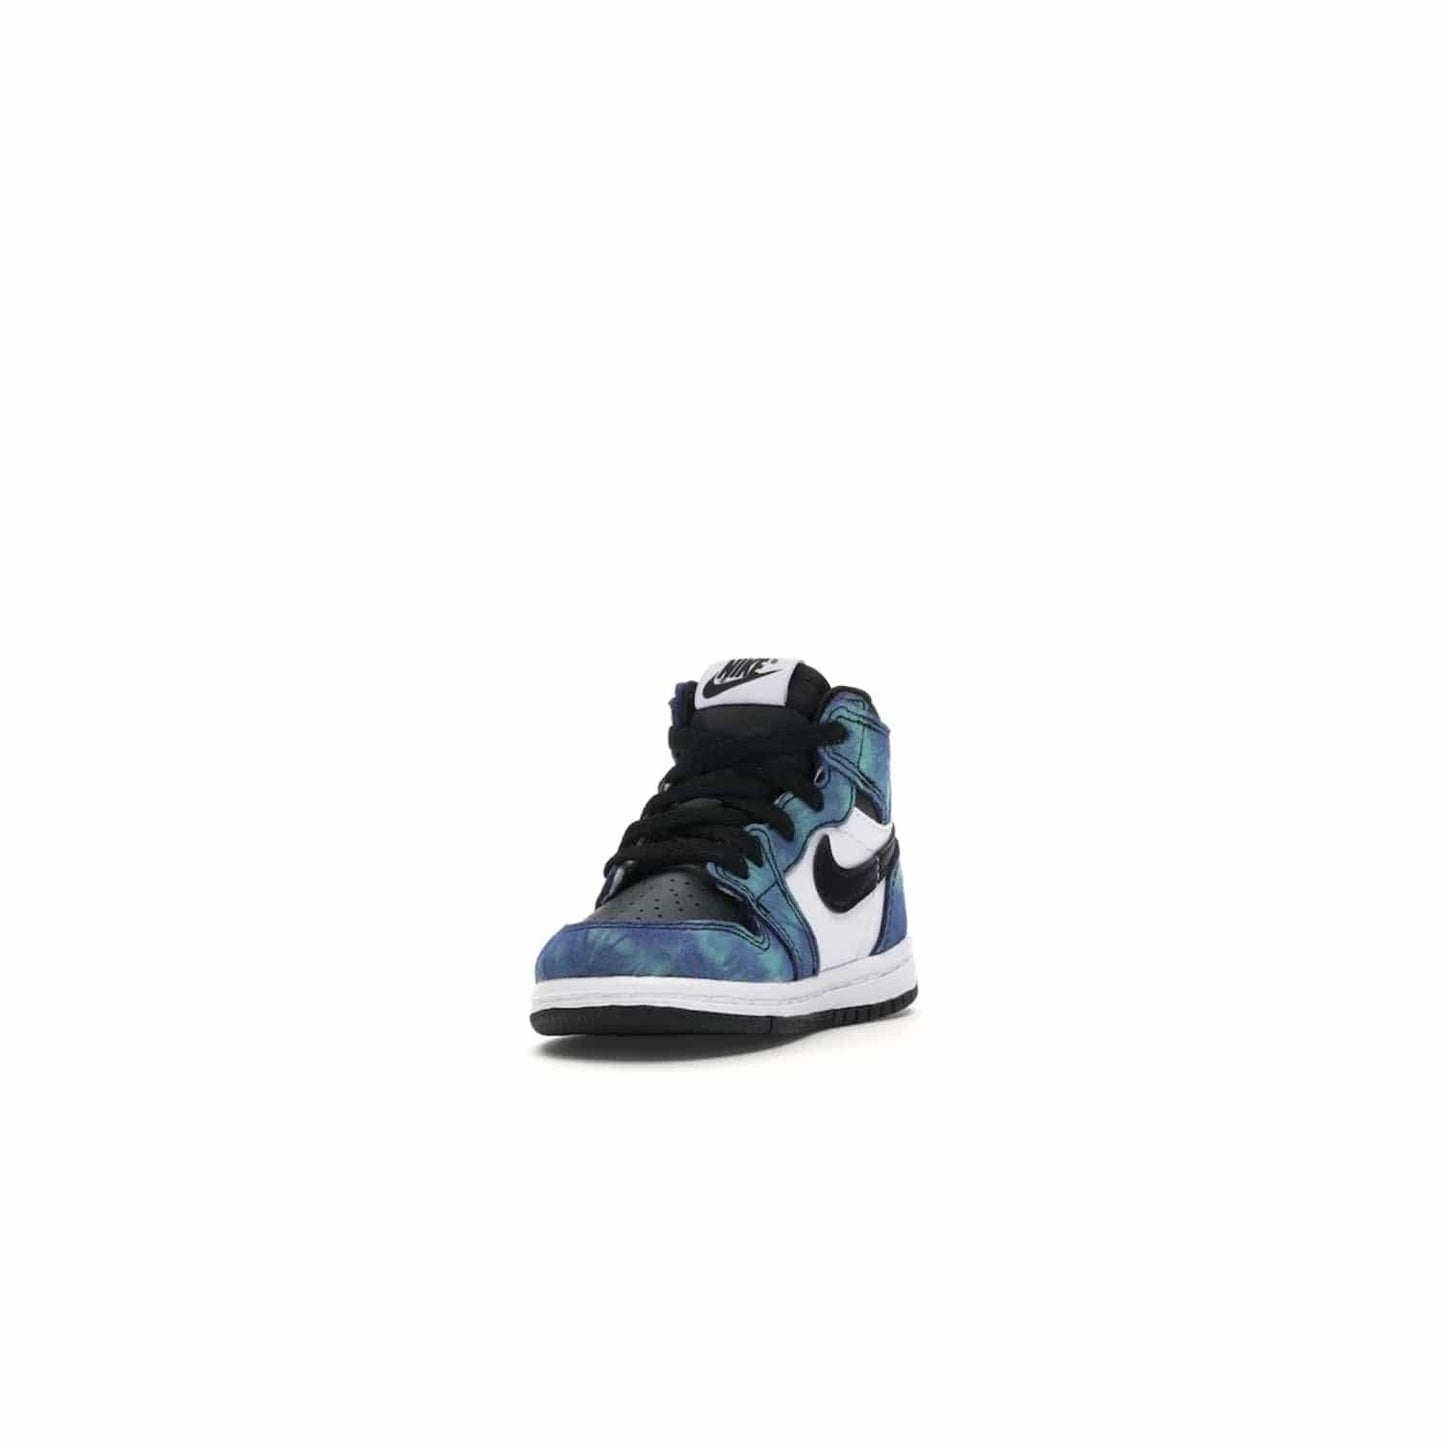 Jordan 1 Retro High Tie Dye (TD) - Image 13 - Only at www.BallersClubKickz.com - Add a unique twist to your sneaker collection with the Jordan 1 Retro High Tie Dye (TD). Classic Air Jordan 1 details like toe box perforations and the signature Swoosh logo on the sidewall are topped with an eye-catching tie dye design that’s perfect for styling all year round.